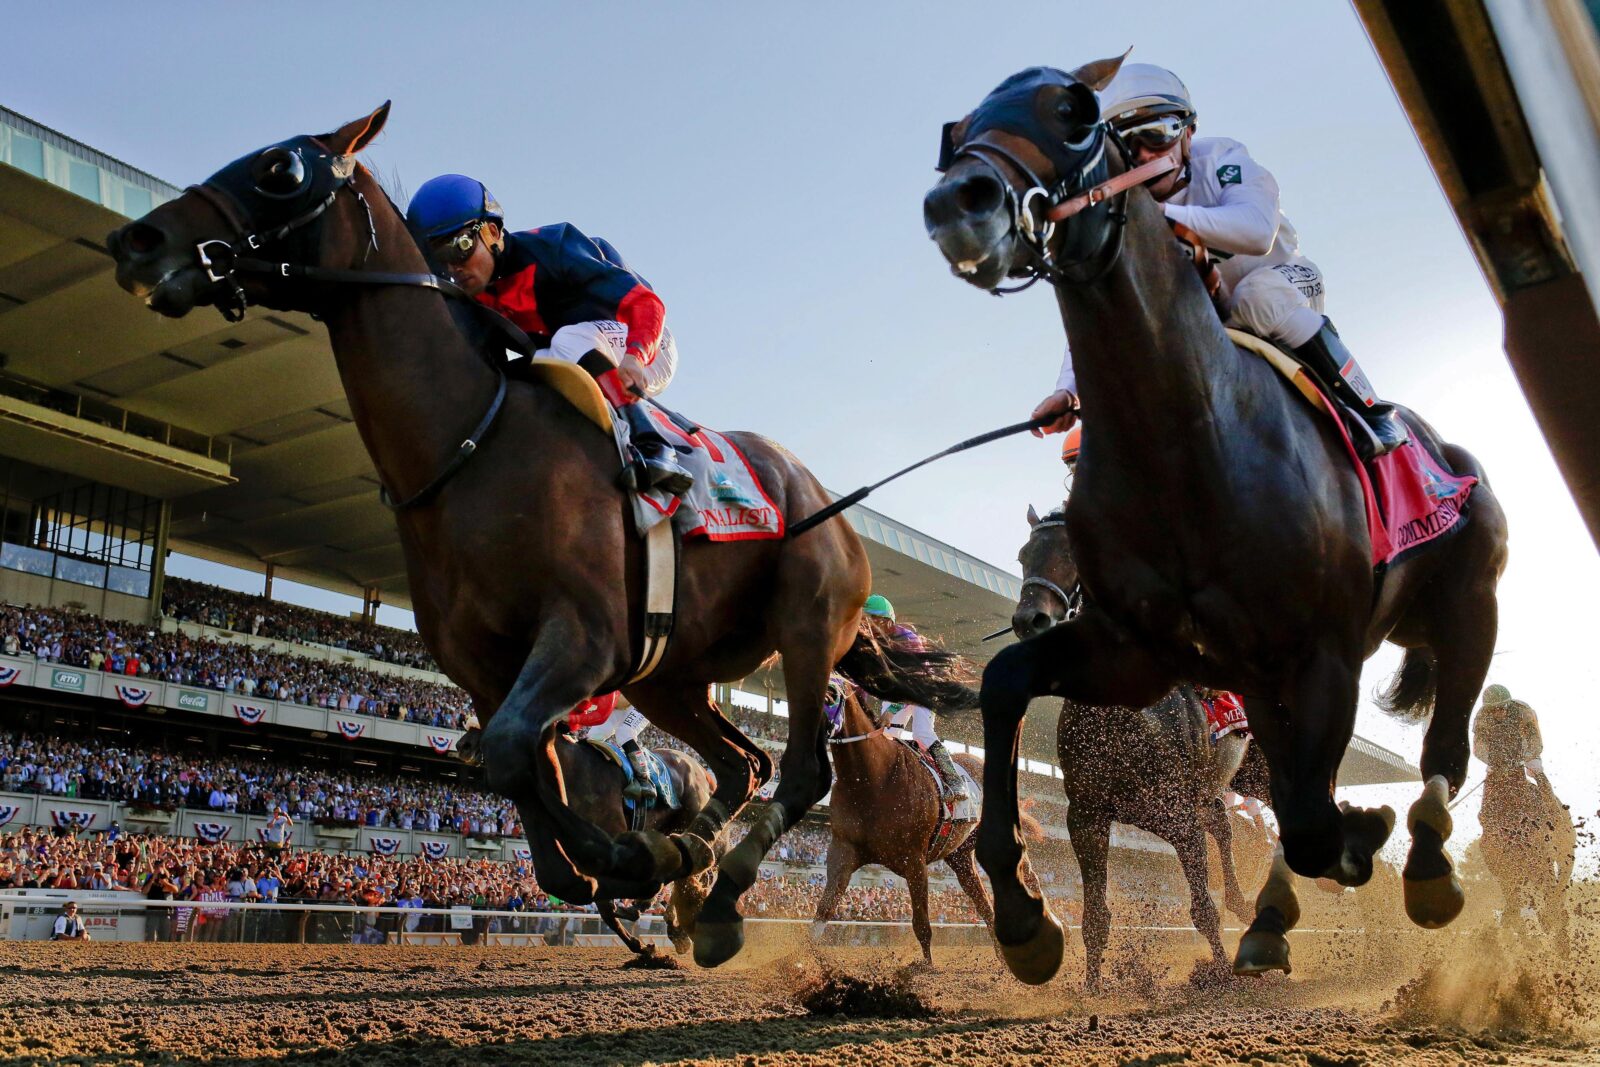 4 Biggest Horse Racing Events in the World